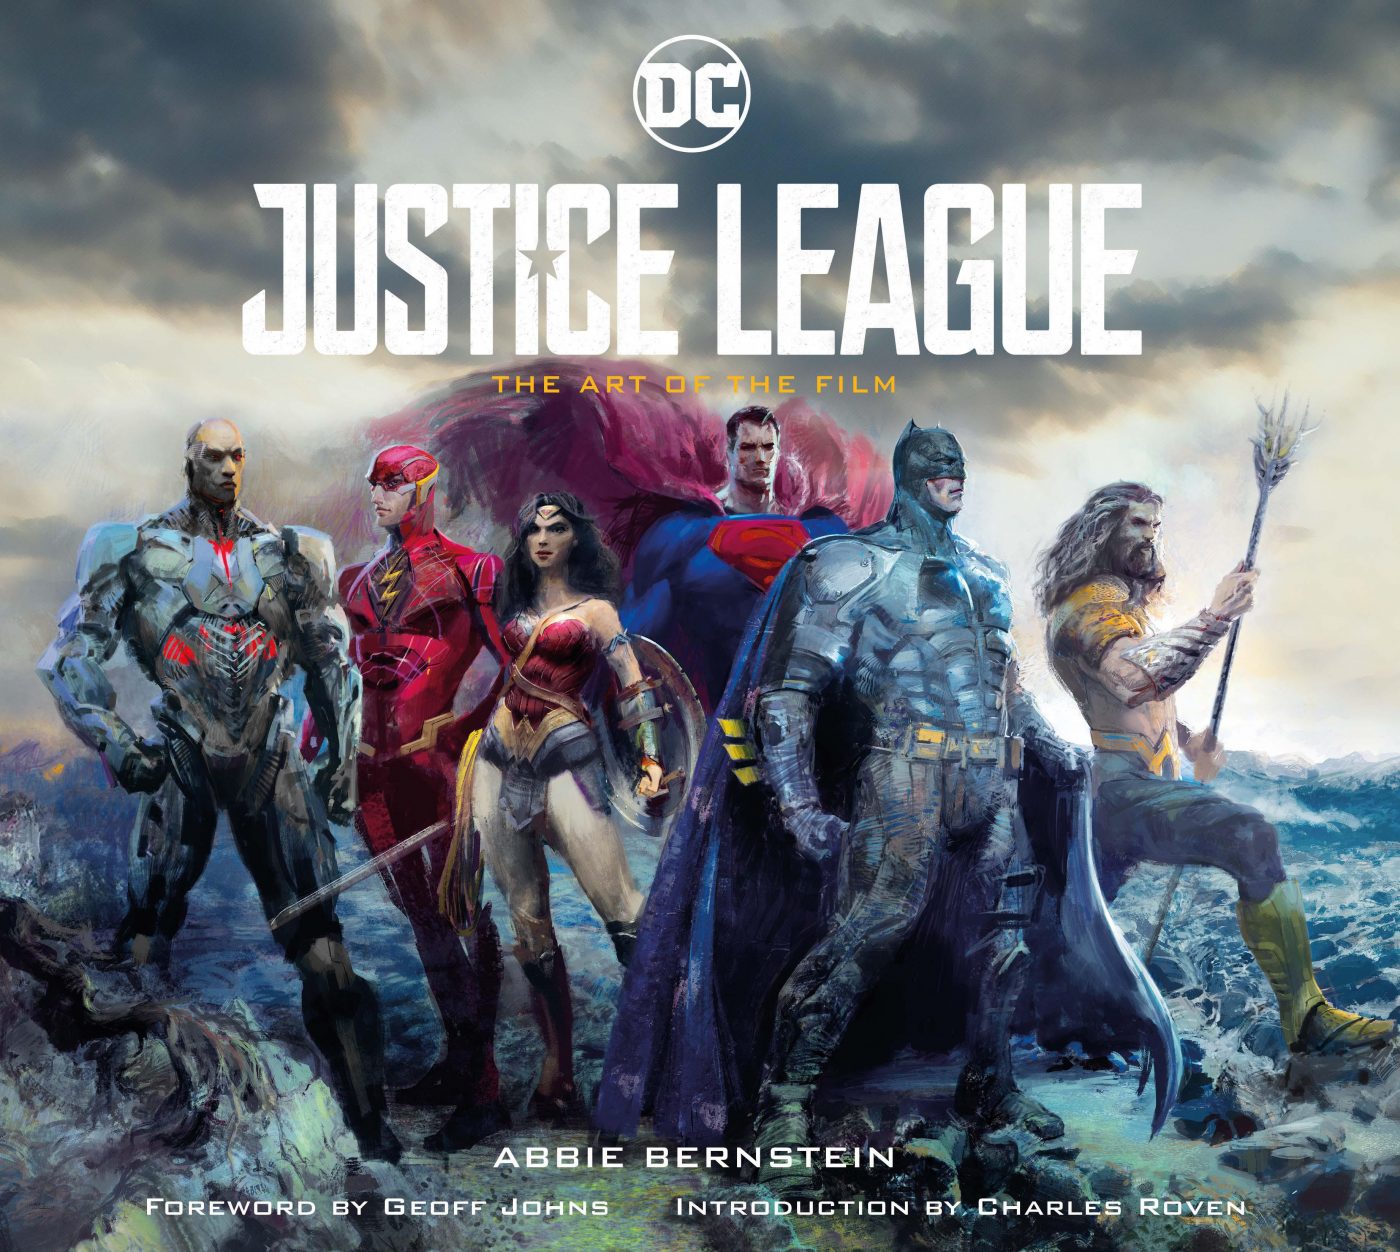 Justice League: The Art of the Film review: Pretty and well made, but light on production details